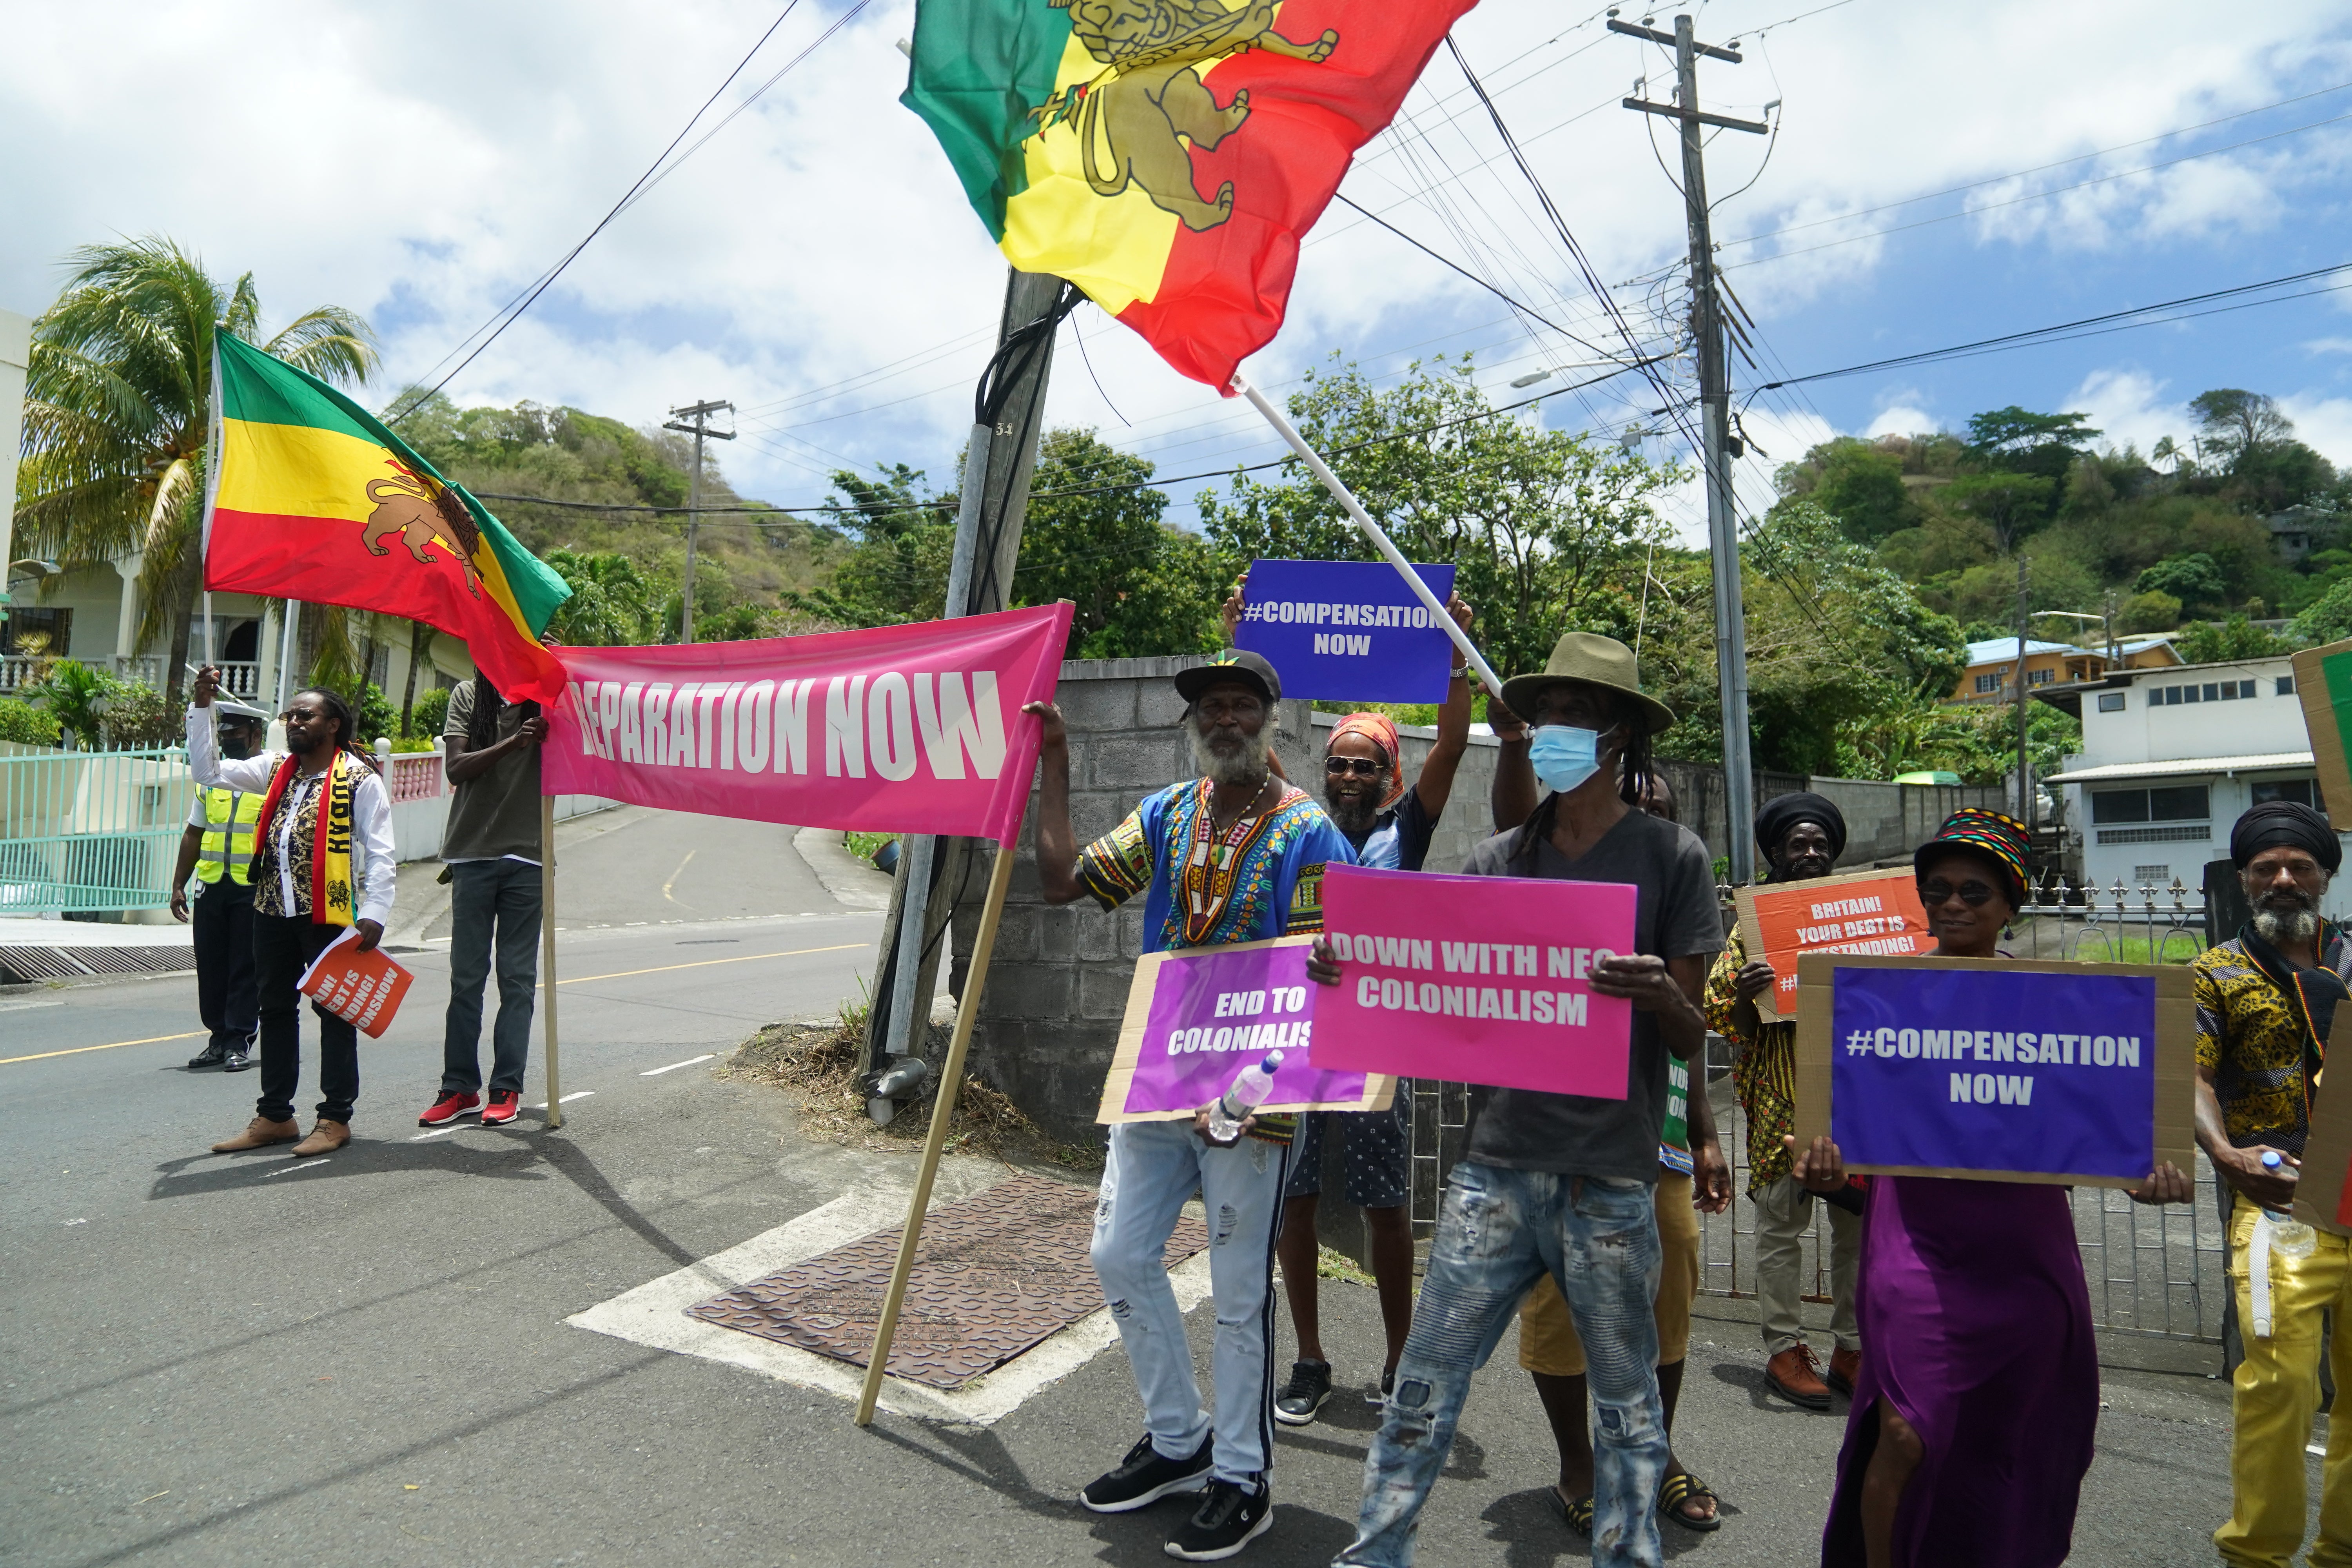 Protesters with with banners protesting against British colonialism in St Vincent and the Grenadines (Joe Giddens/PA)